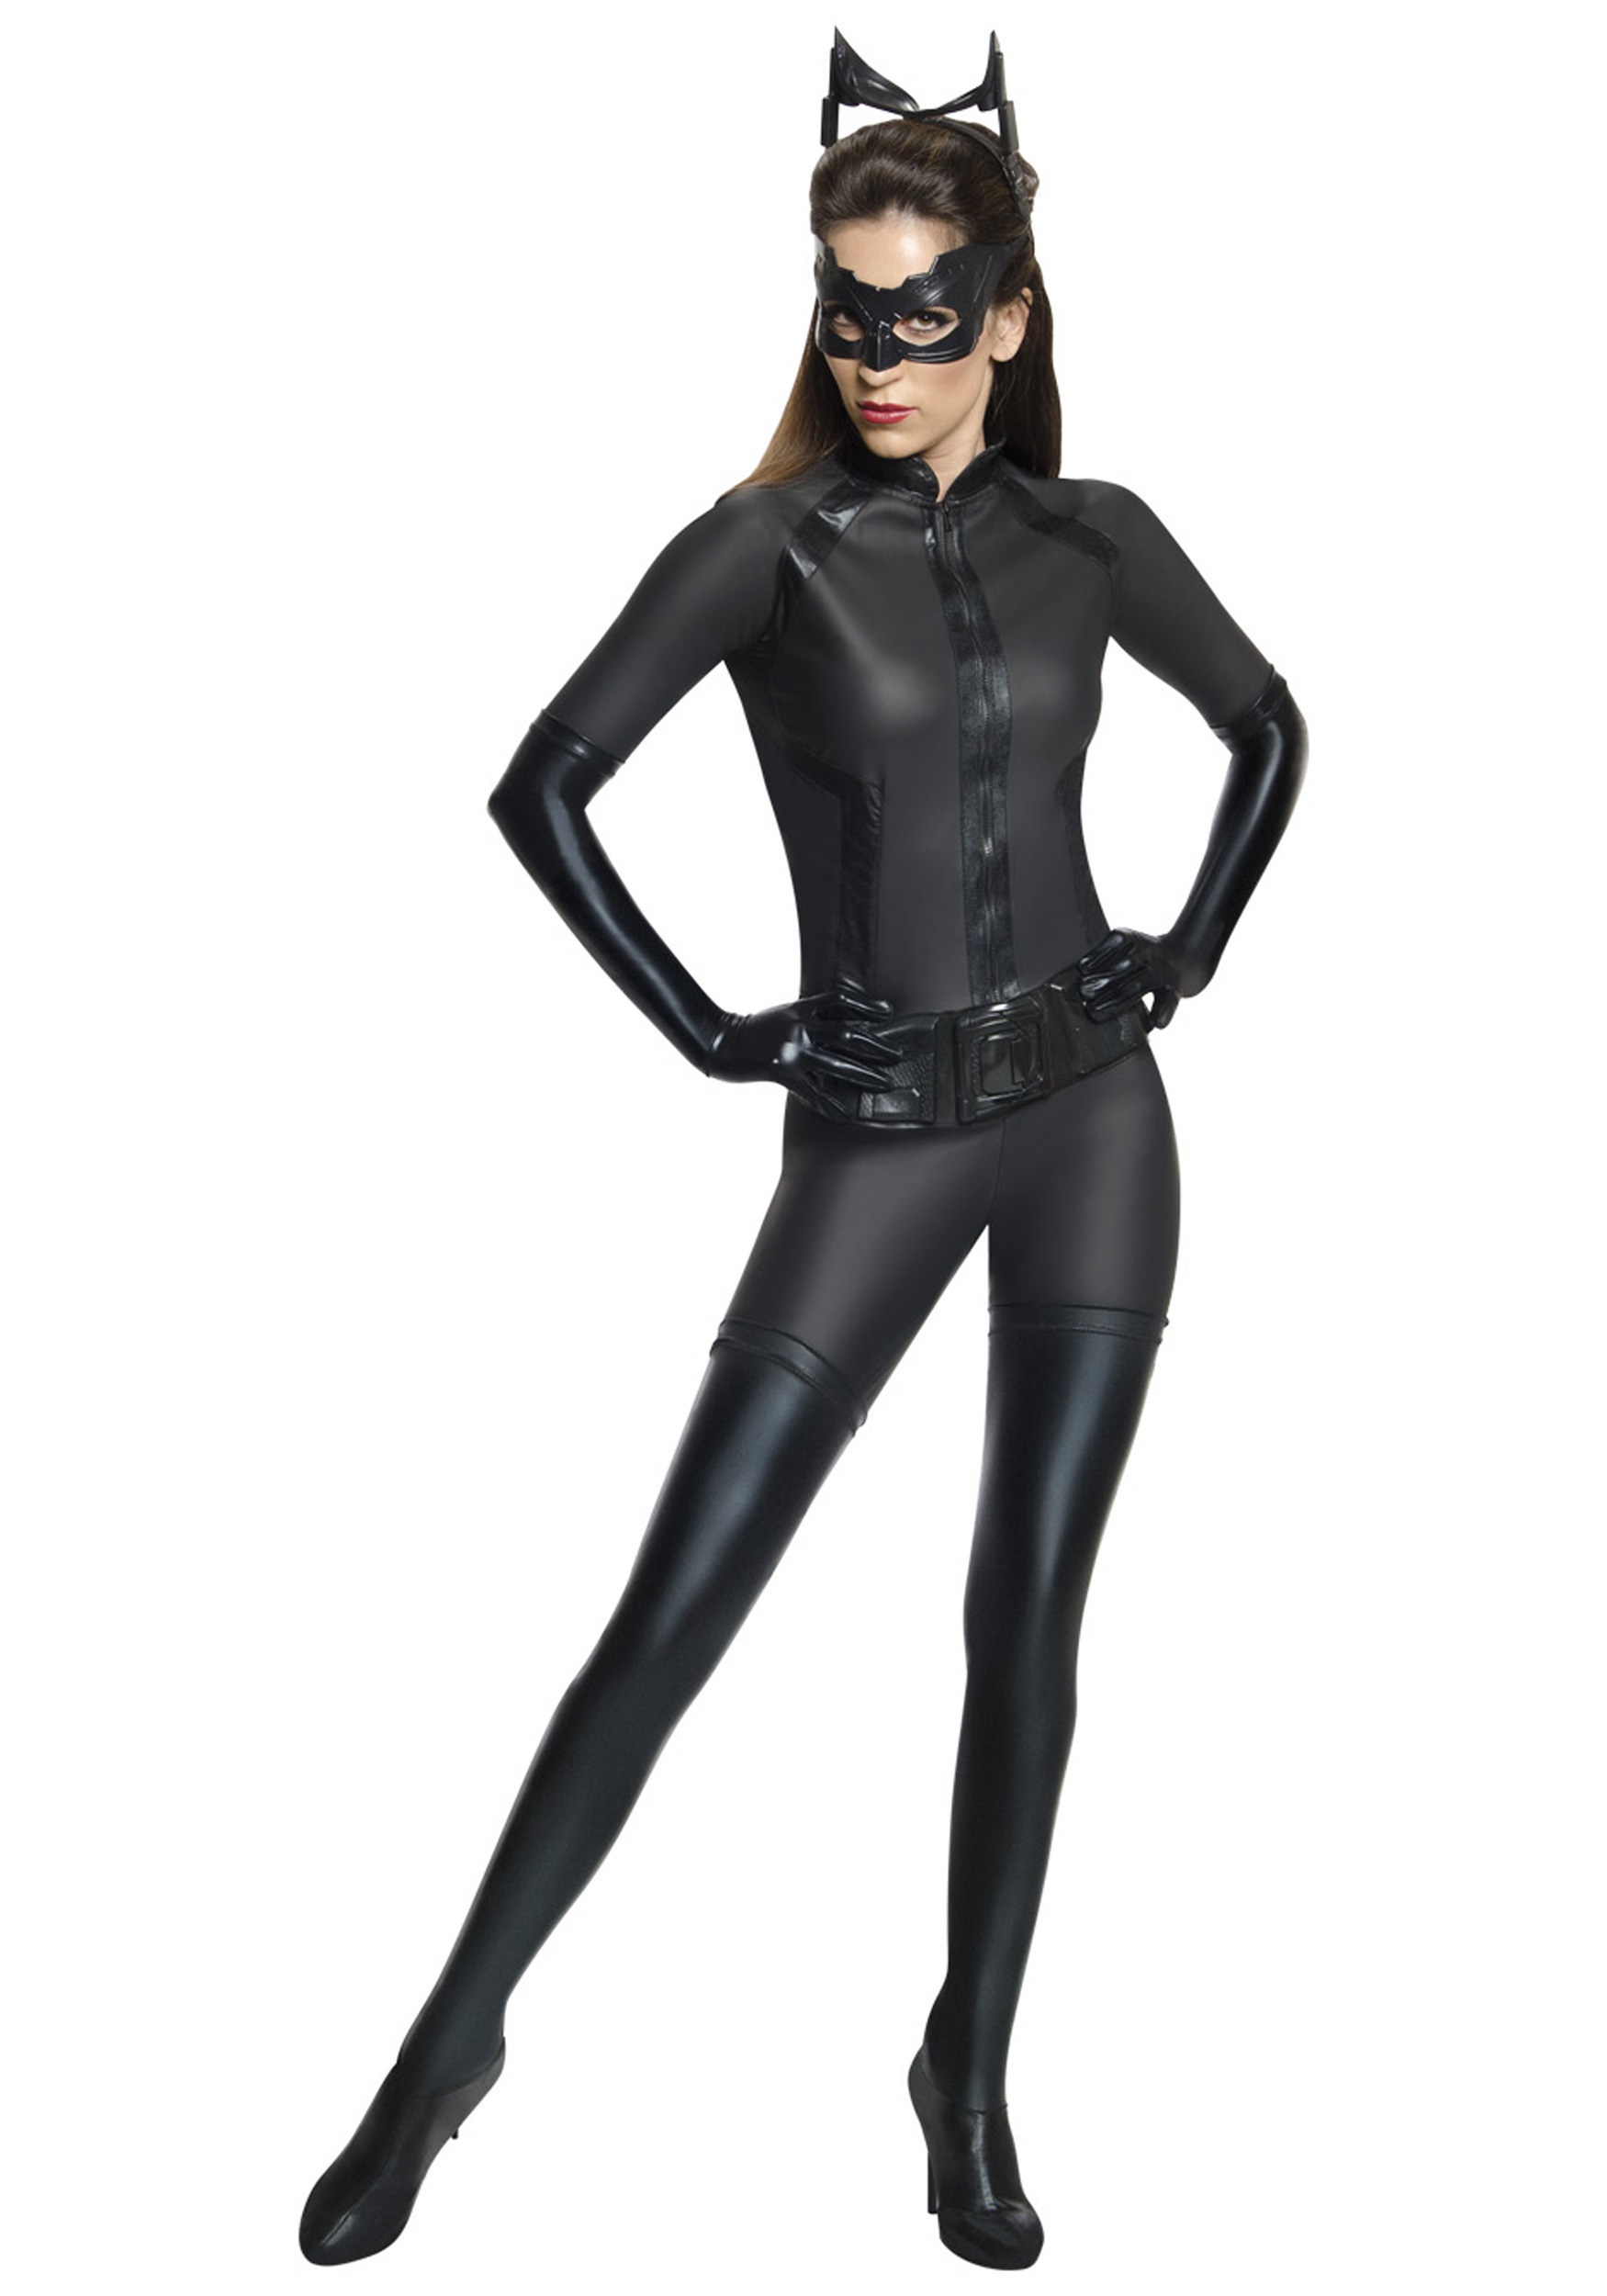 Sexy Grand Heritage Catwoman Costume For Women , Adult Superhero Costume